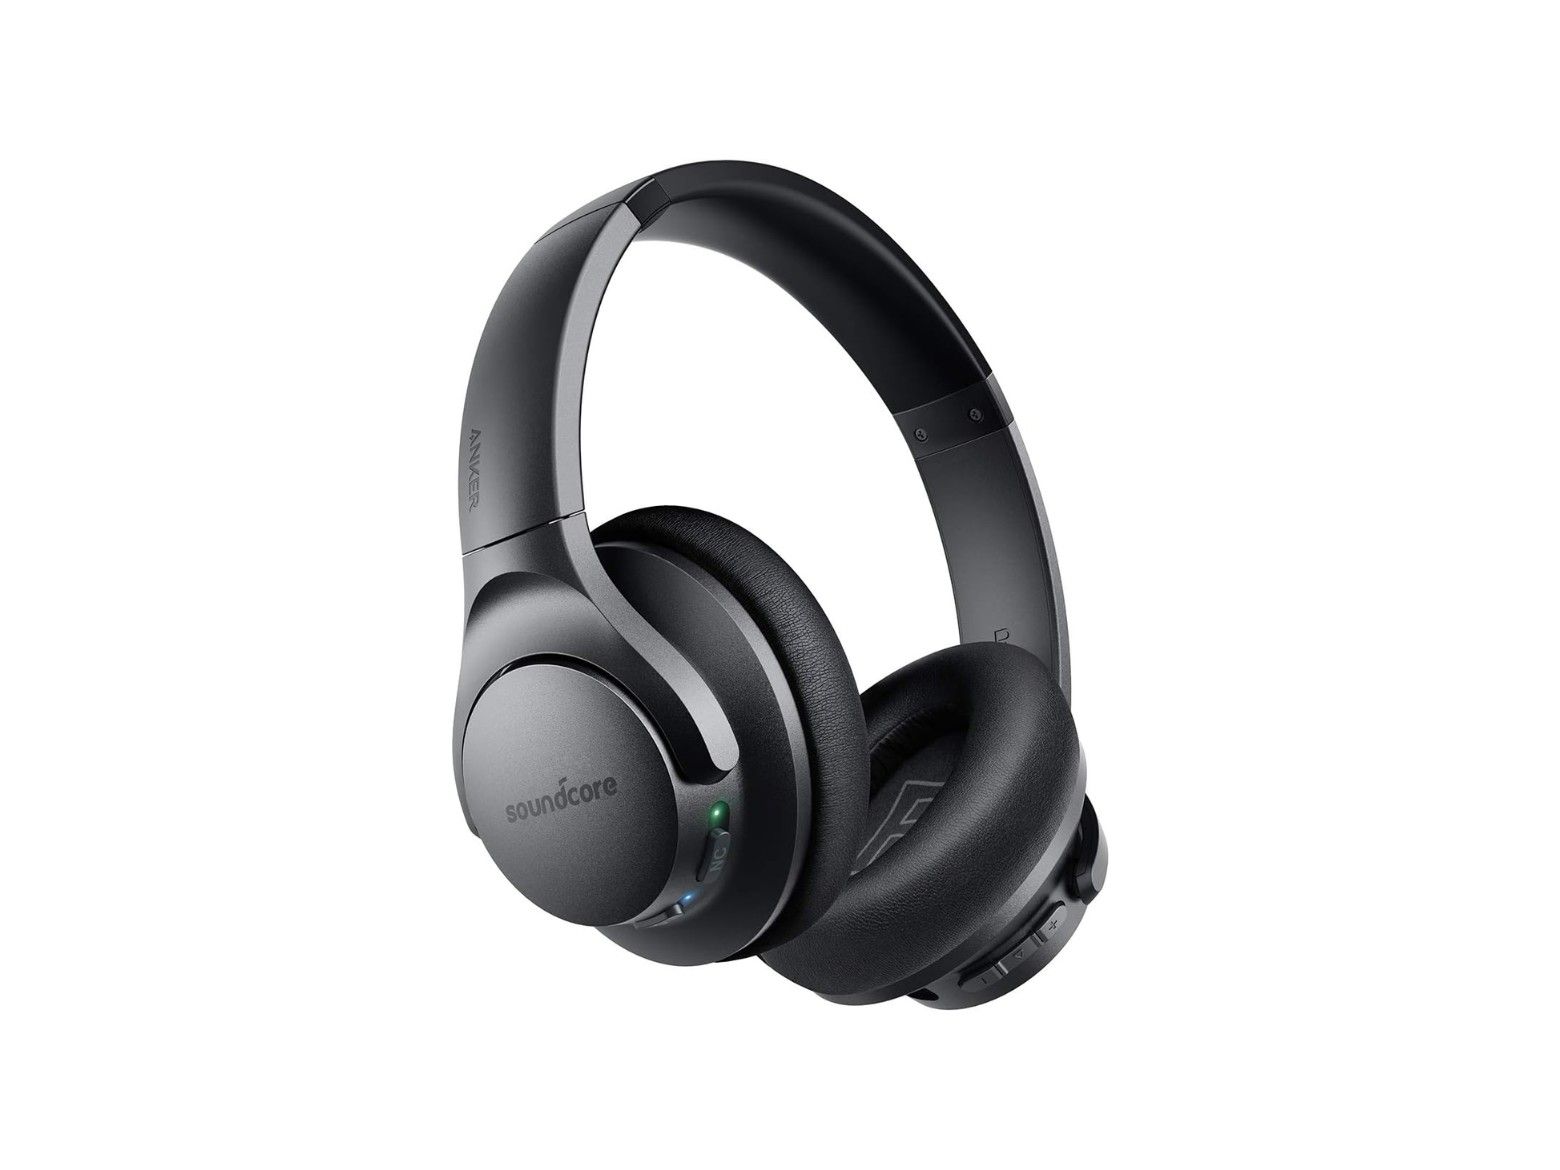 Anker soundcore life q20 headphones for remote work